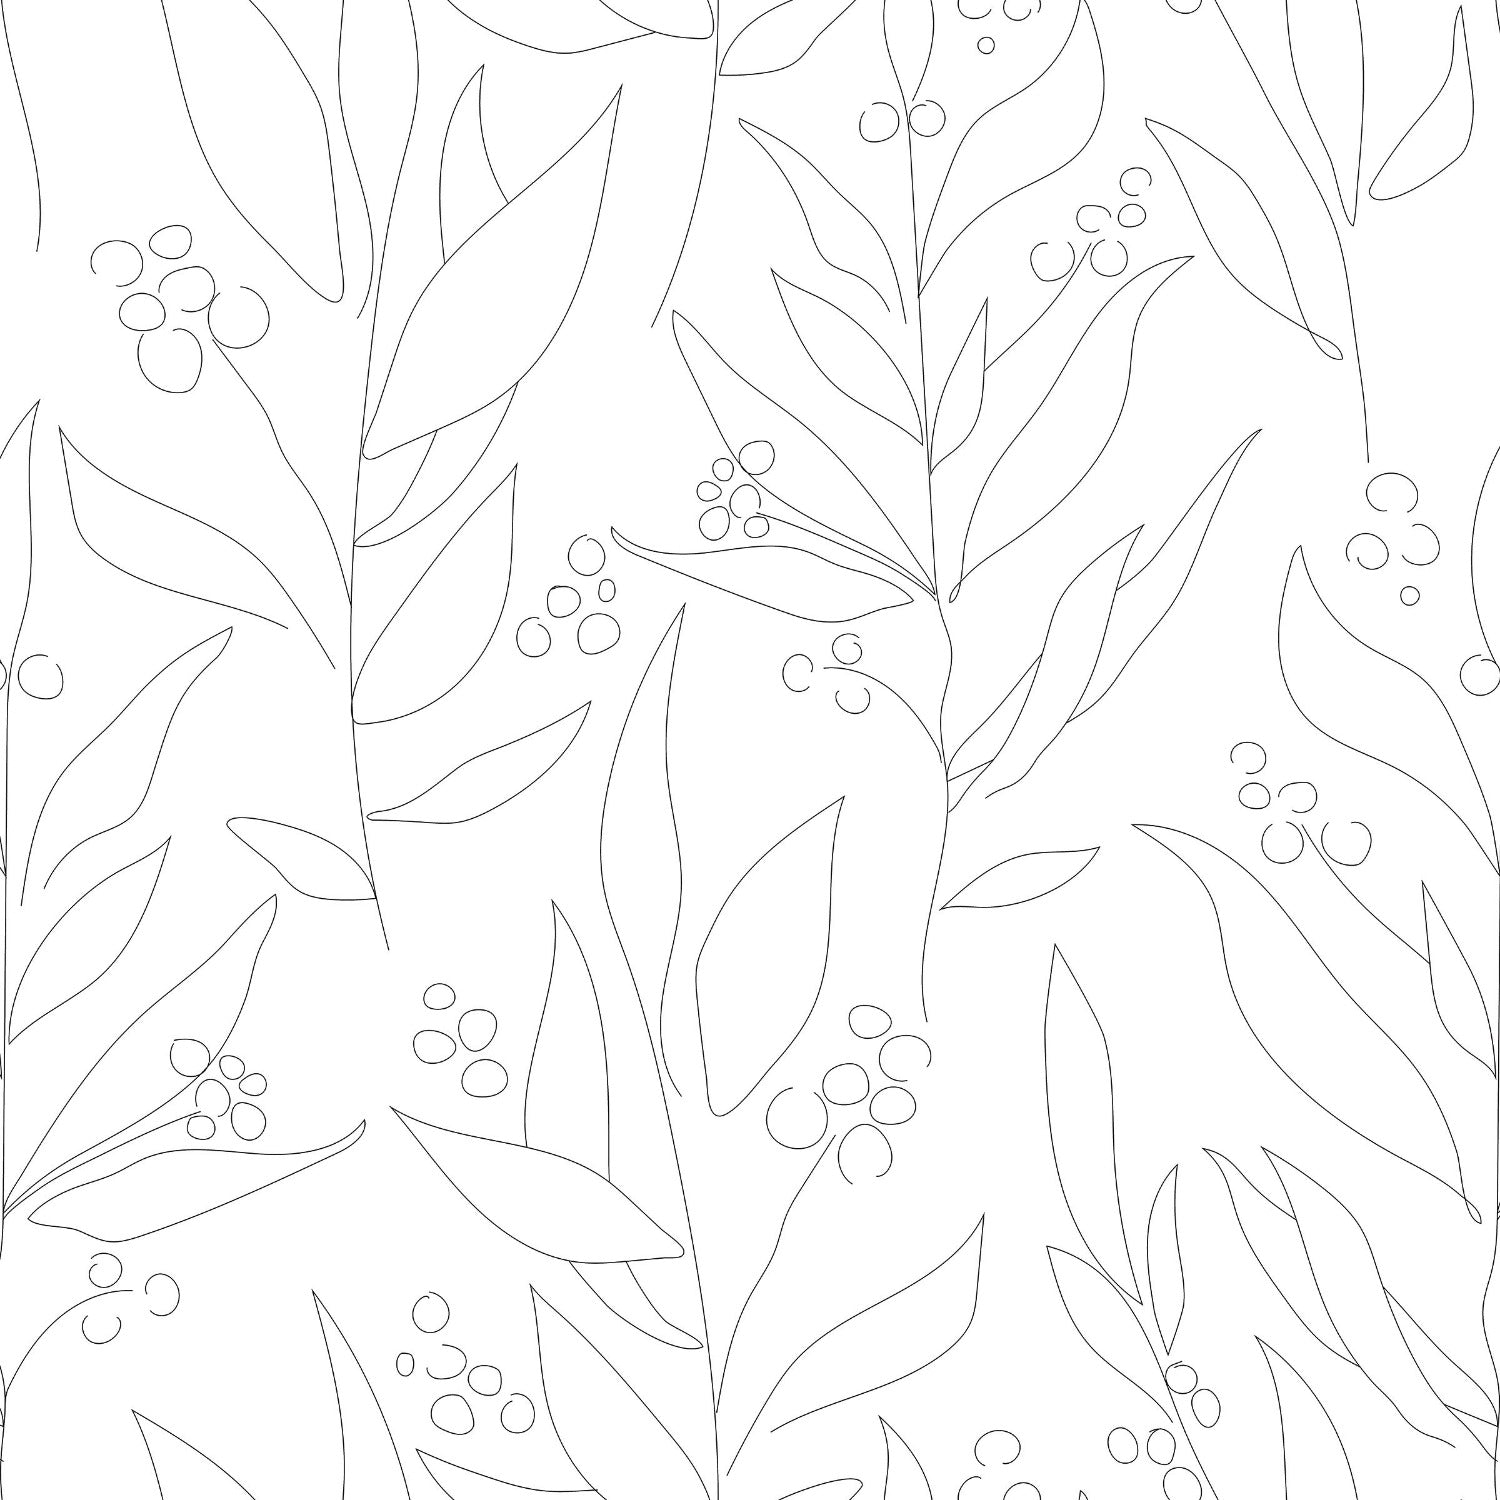 A detailed close-up of the white wallpaper with an abstract black floral design, highlighting the intricate line art of leaves and berries.